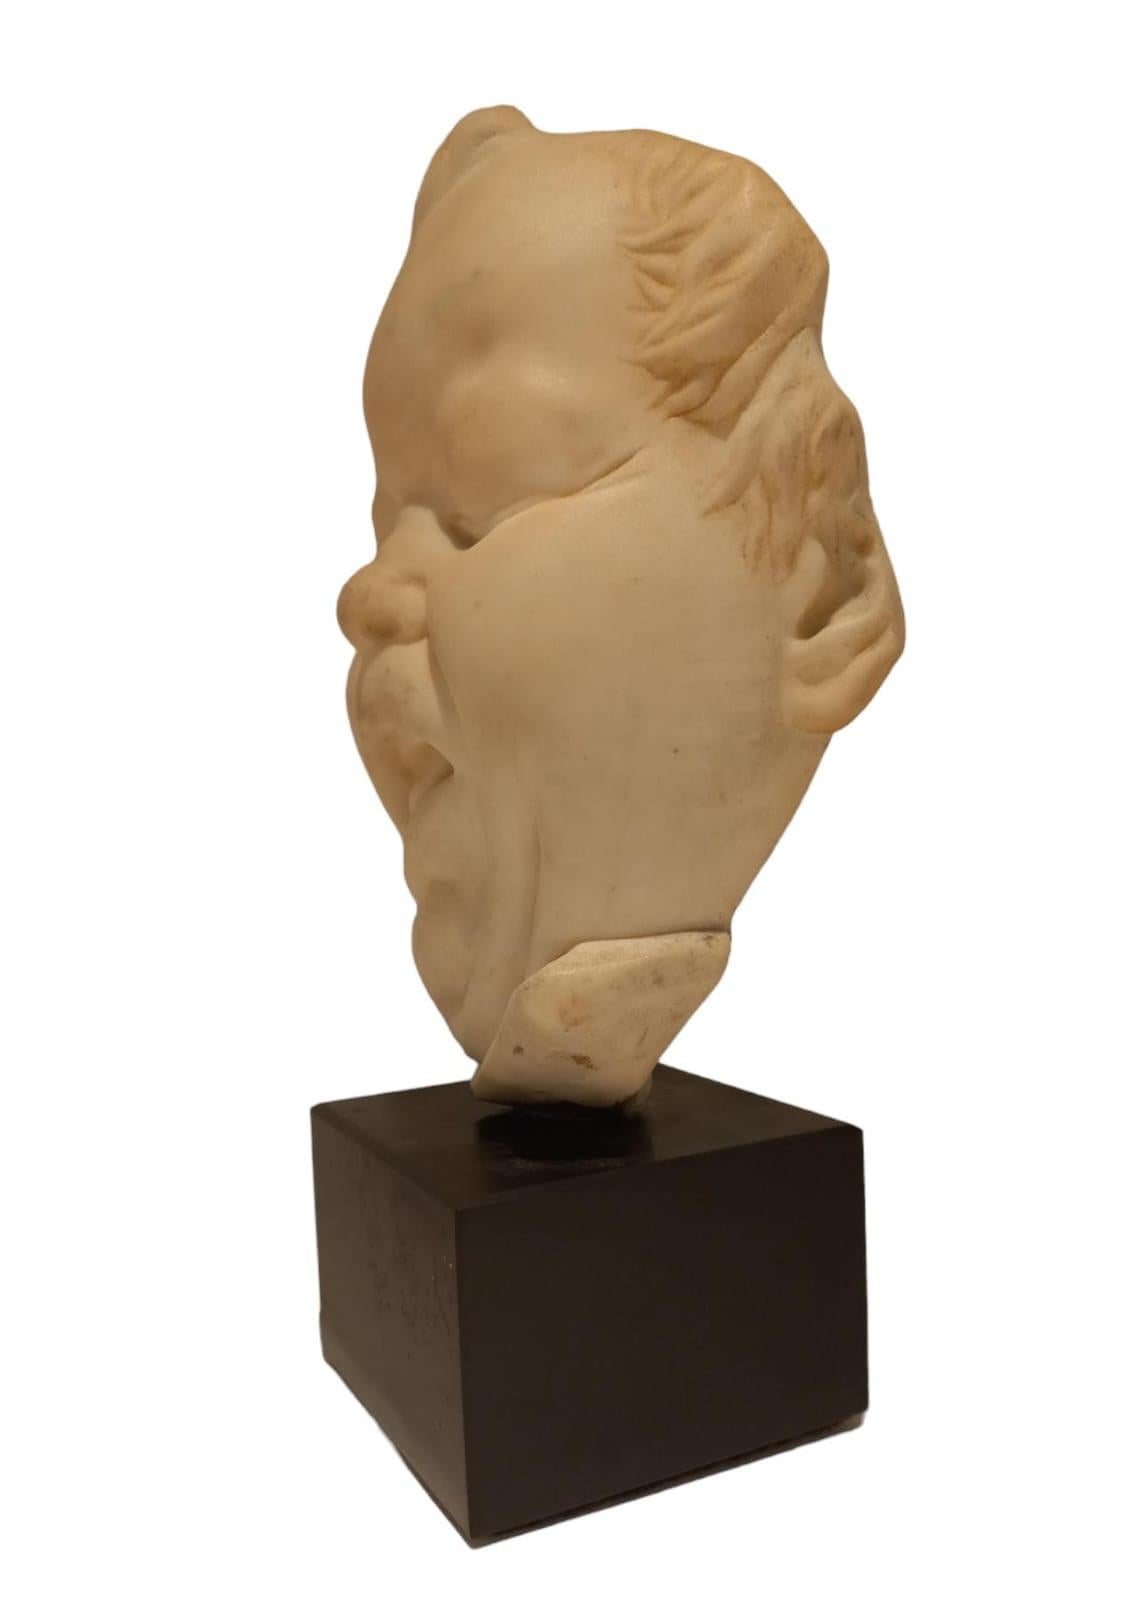 White marble sculpture depicting the face of a child with a grimace, 19th century, height of sculpture alone 23 cm, width 17 cm, black Belgium base is 7 cm high and has a size of 10x10 cm.
The sculpture is not signed.